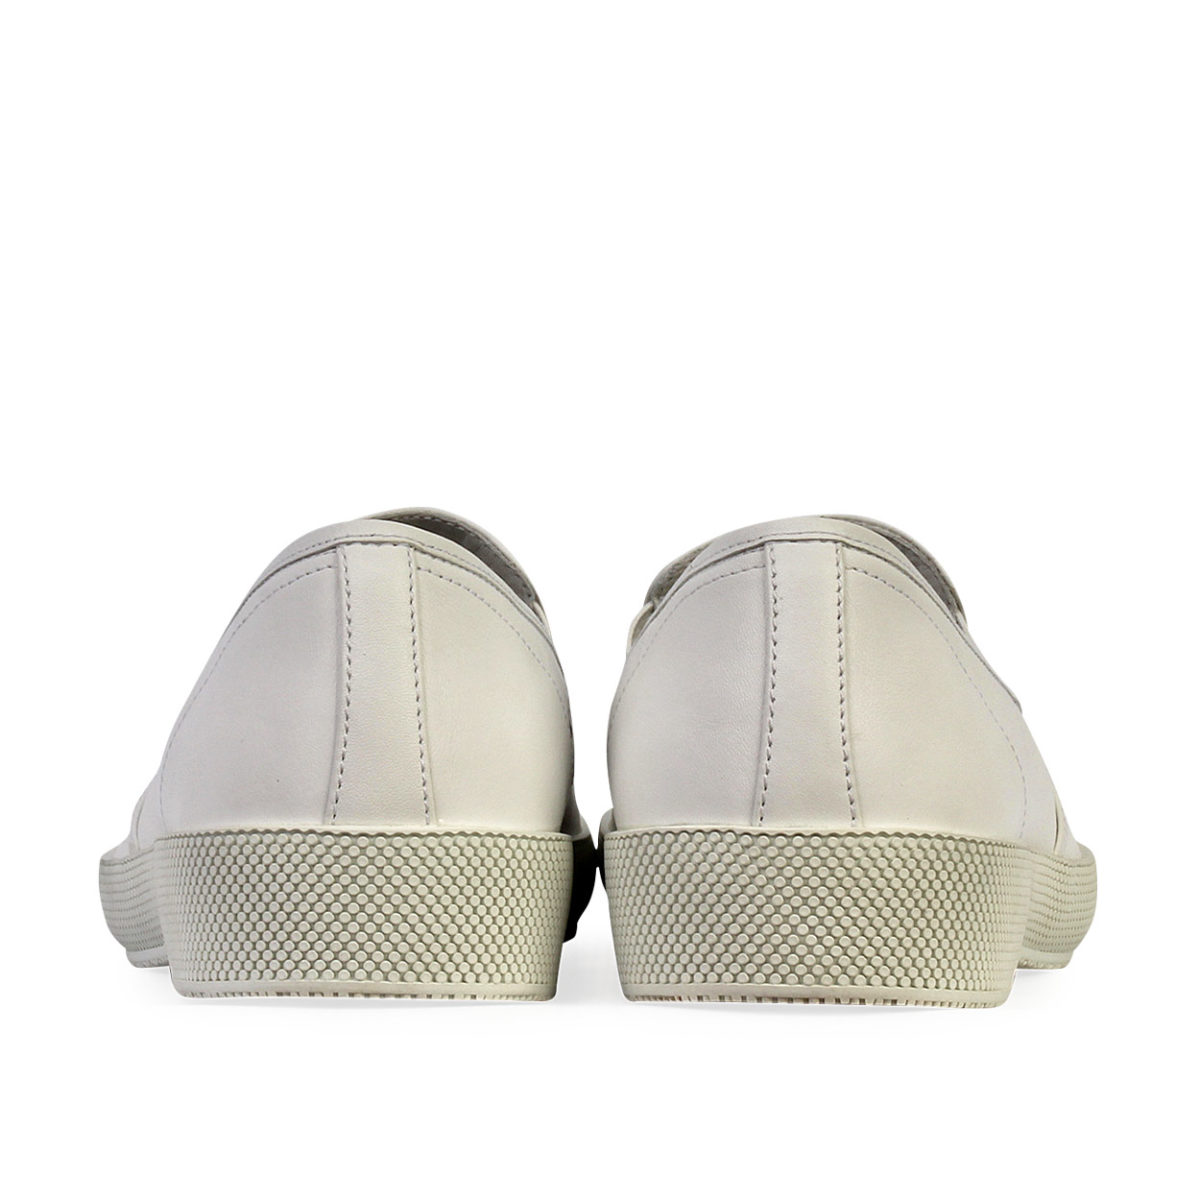 PRADA Leather Slip On Loafers White - S: 43 (9) - NEW | Luxity